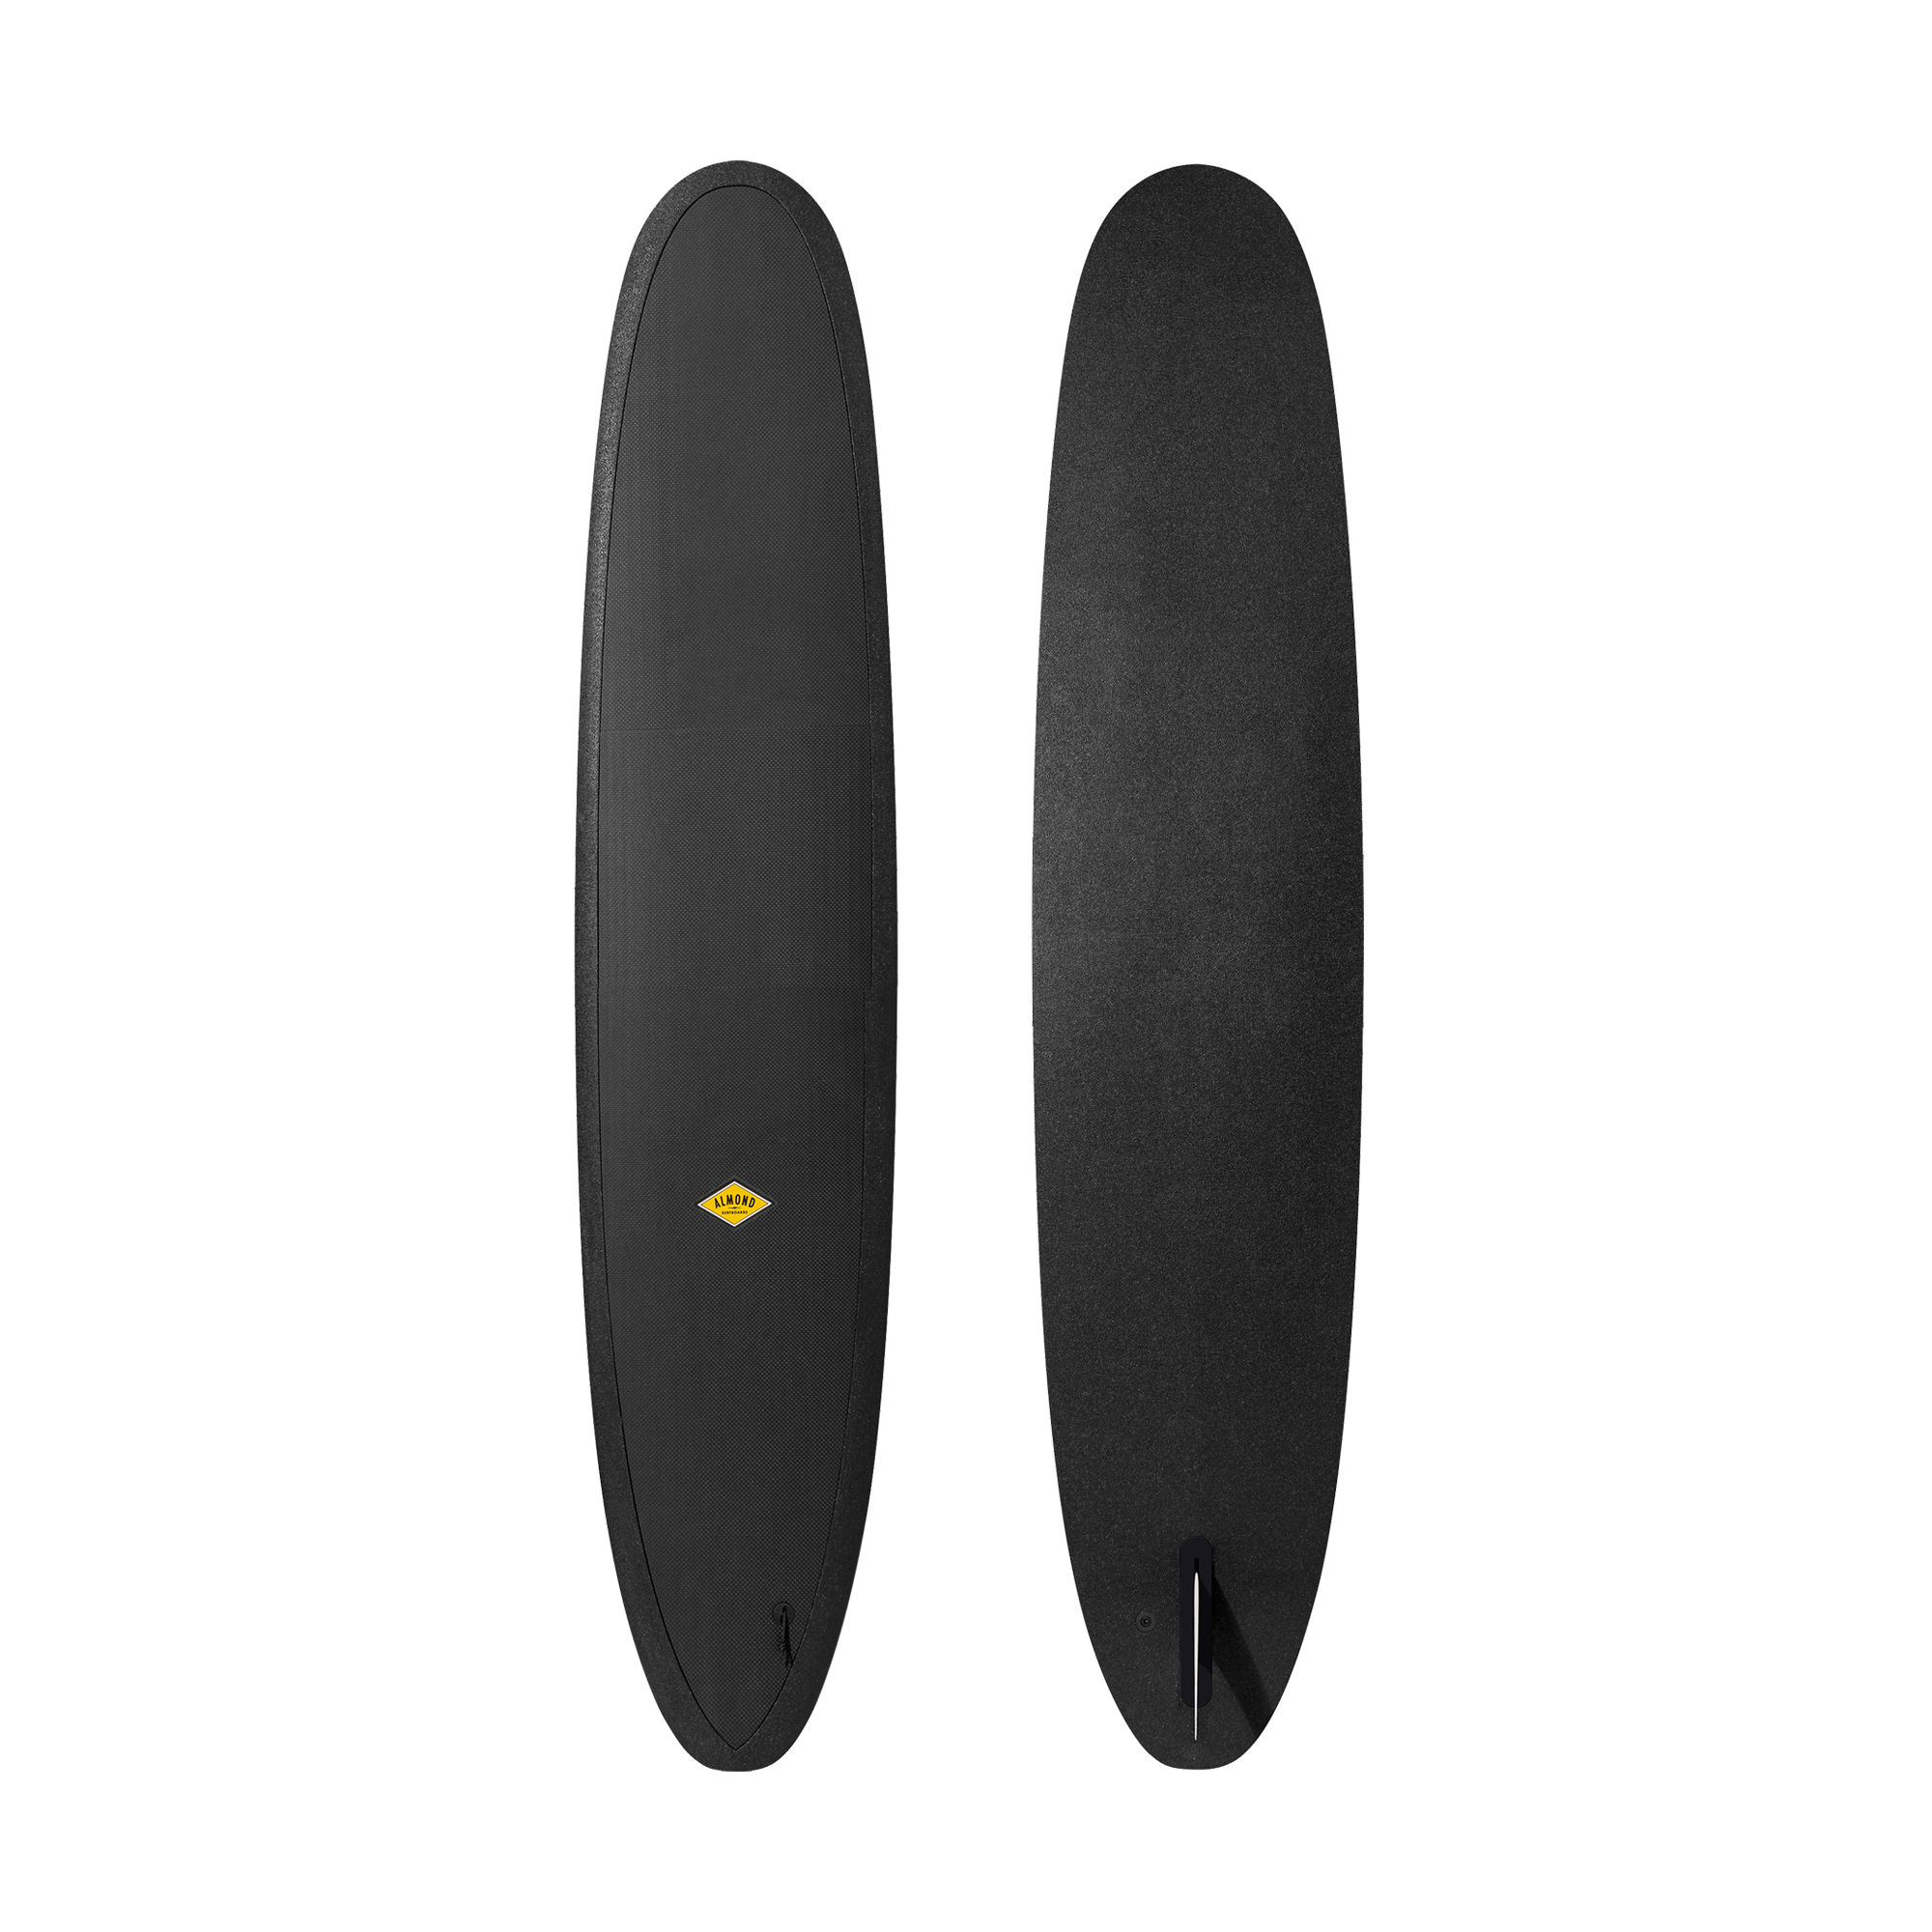 Front, Profile and back of a black 9 foot 2 inch Almond Surf Thump surfboard with a logo on a transparent background